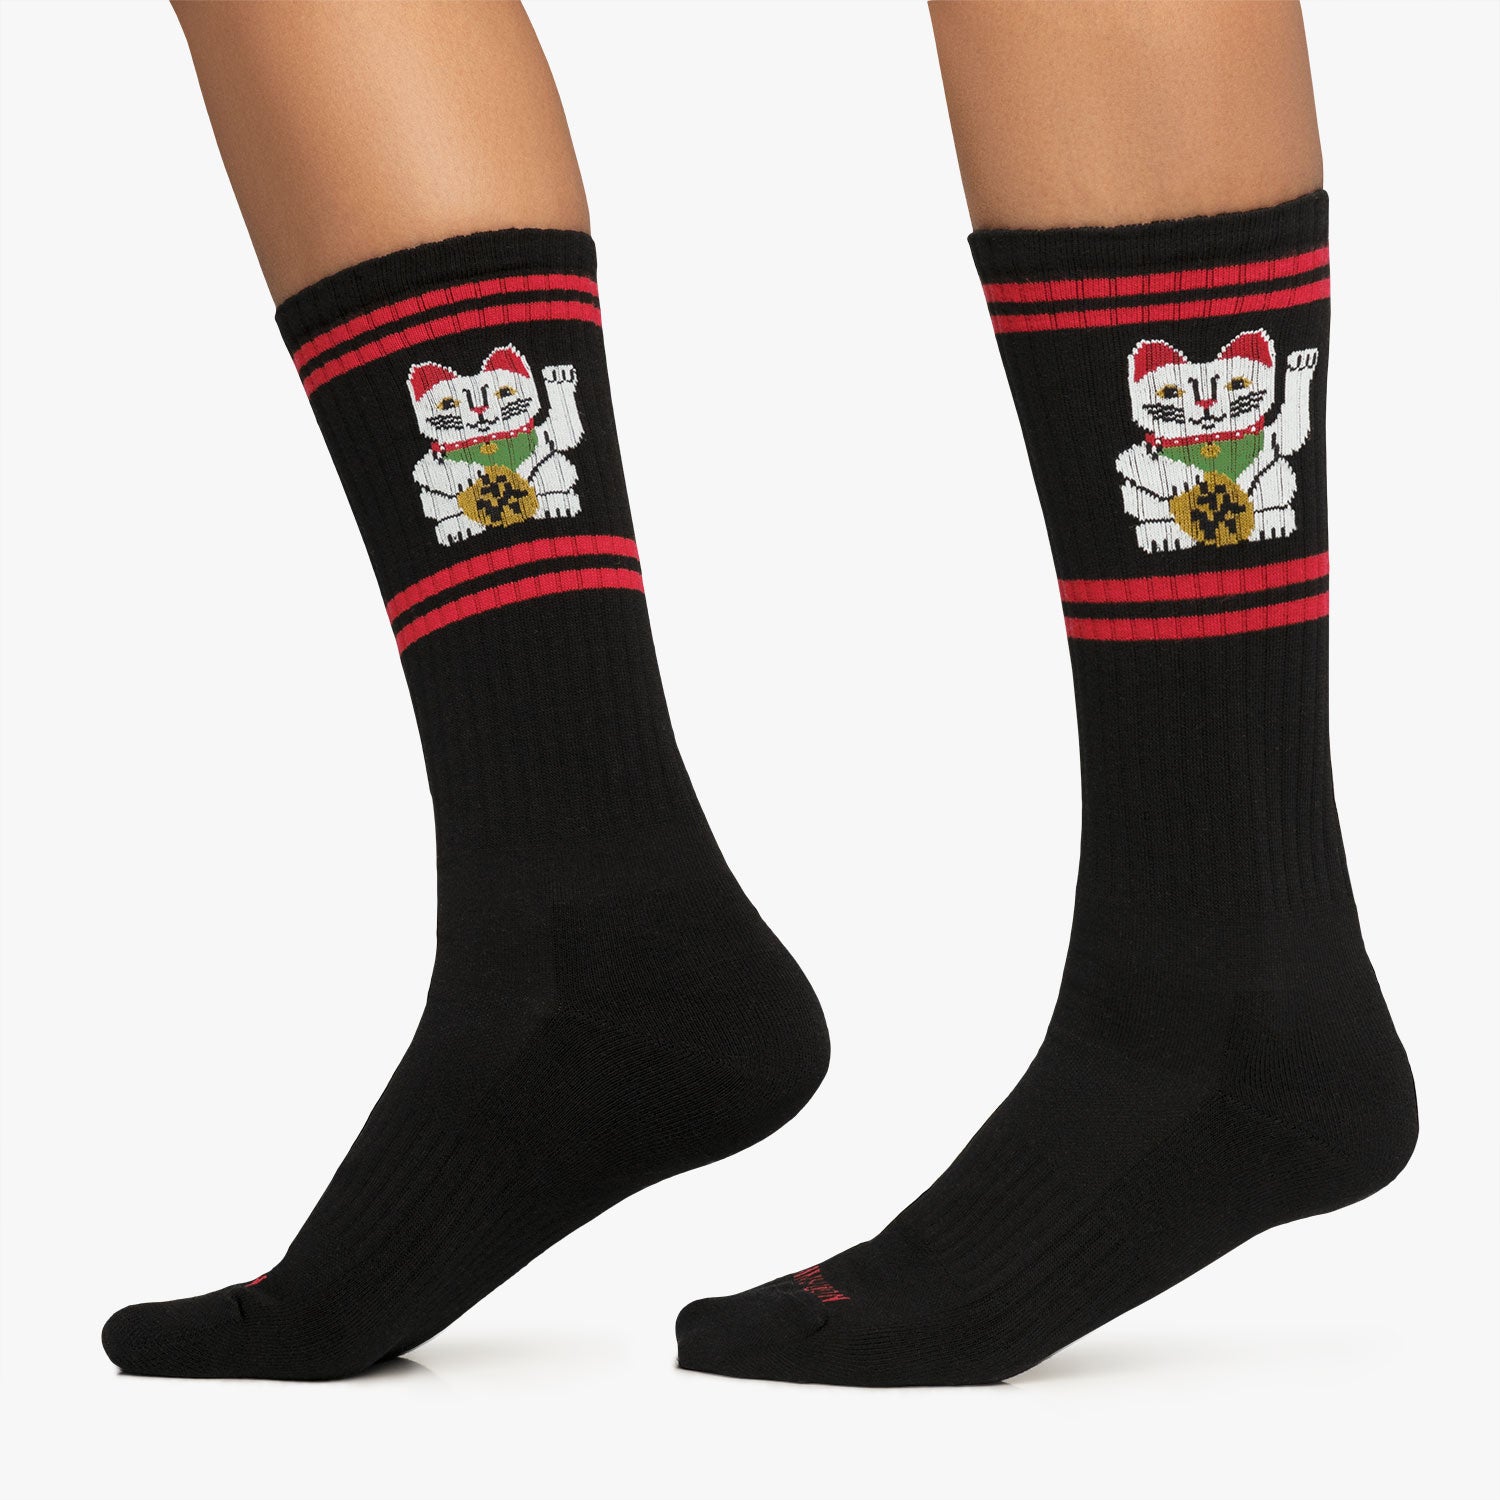 Athletic Lucky Cat - Black (2)